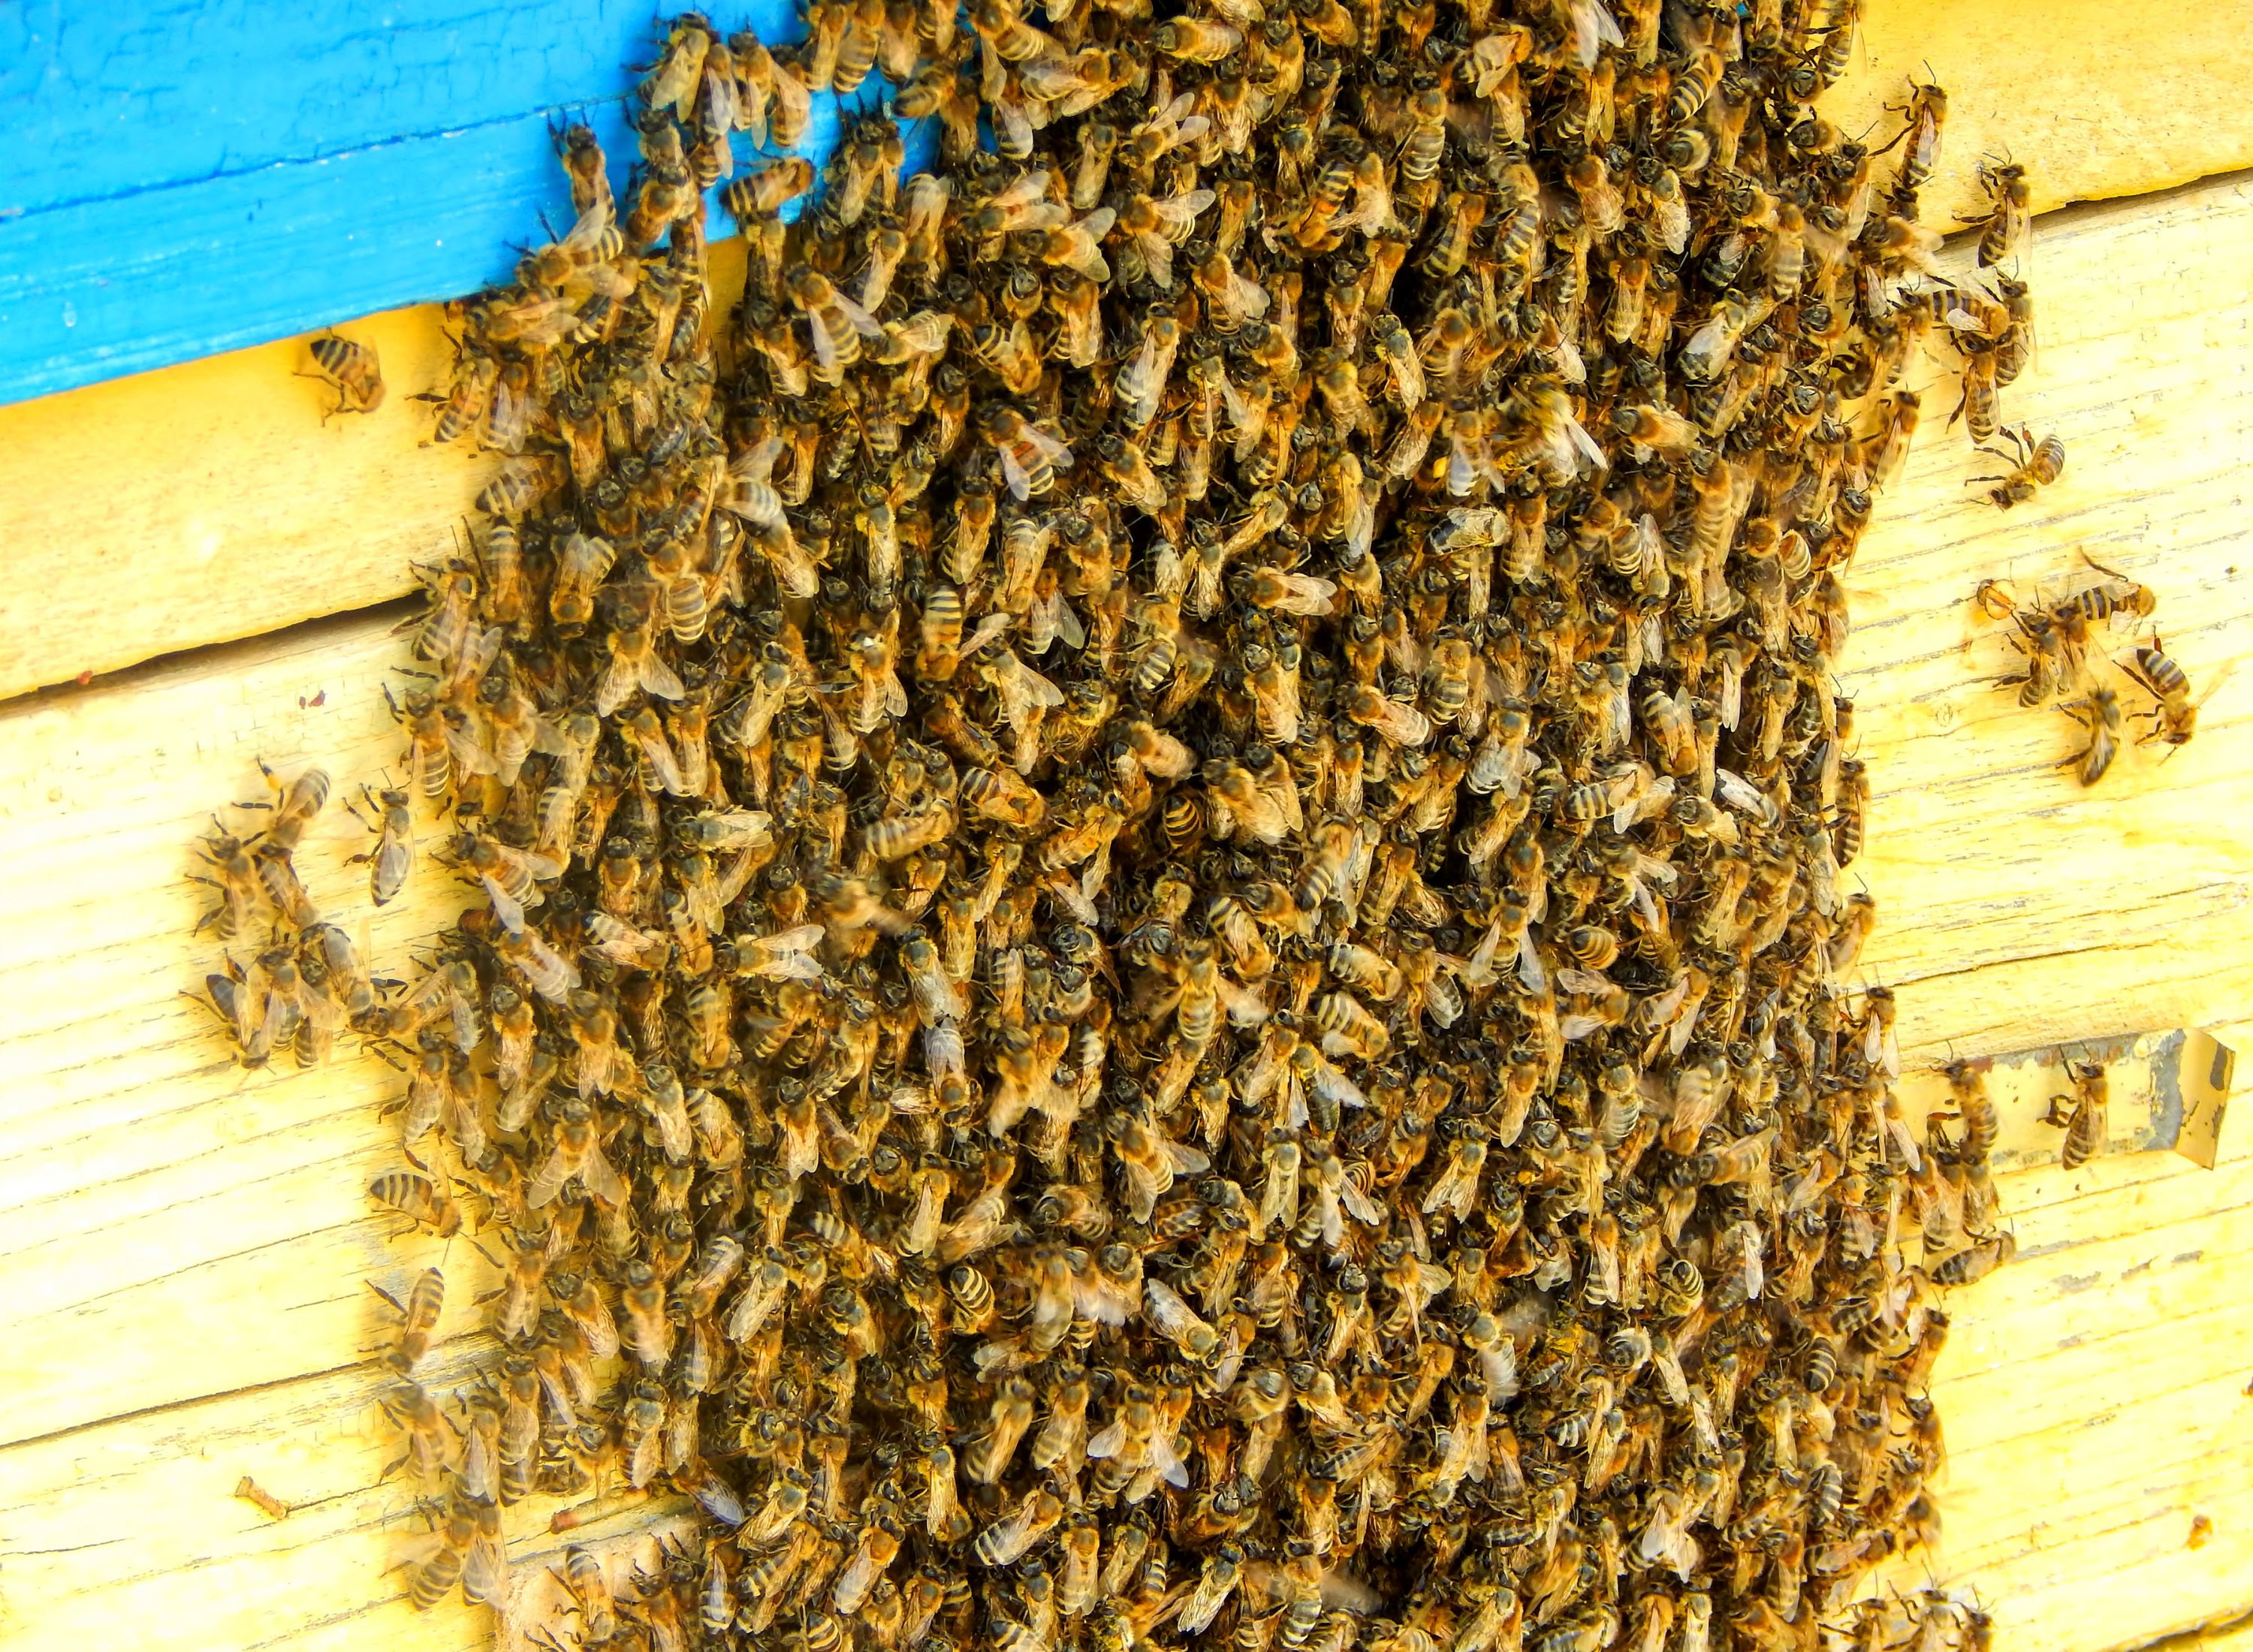 swarming on a hive